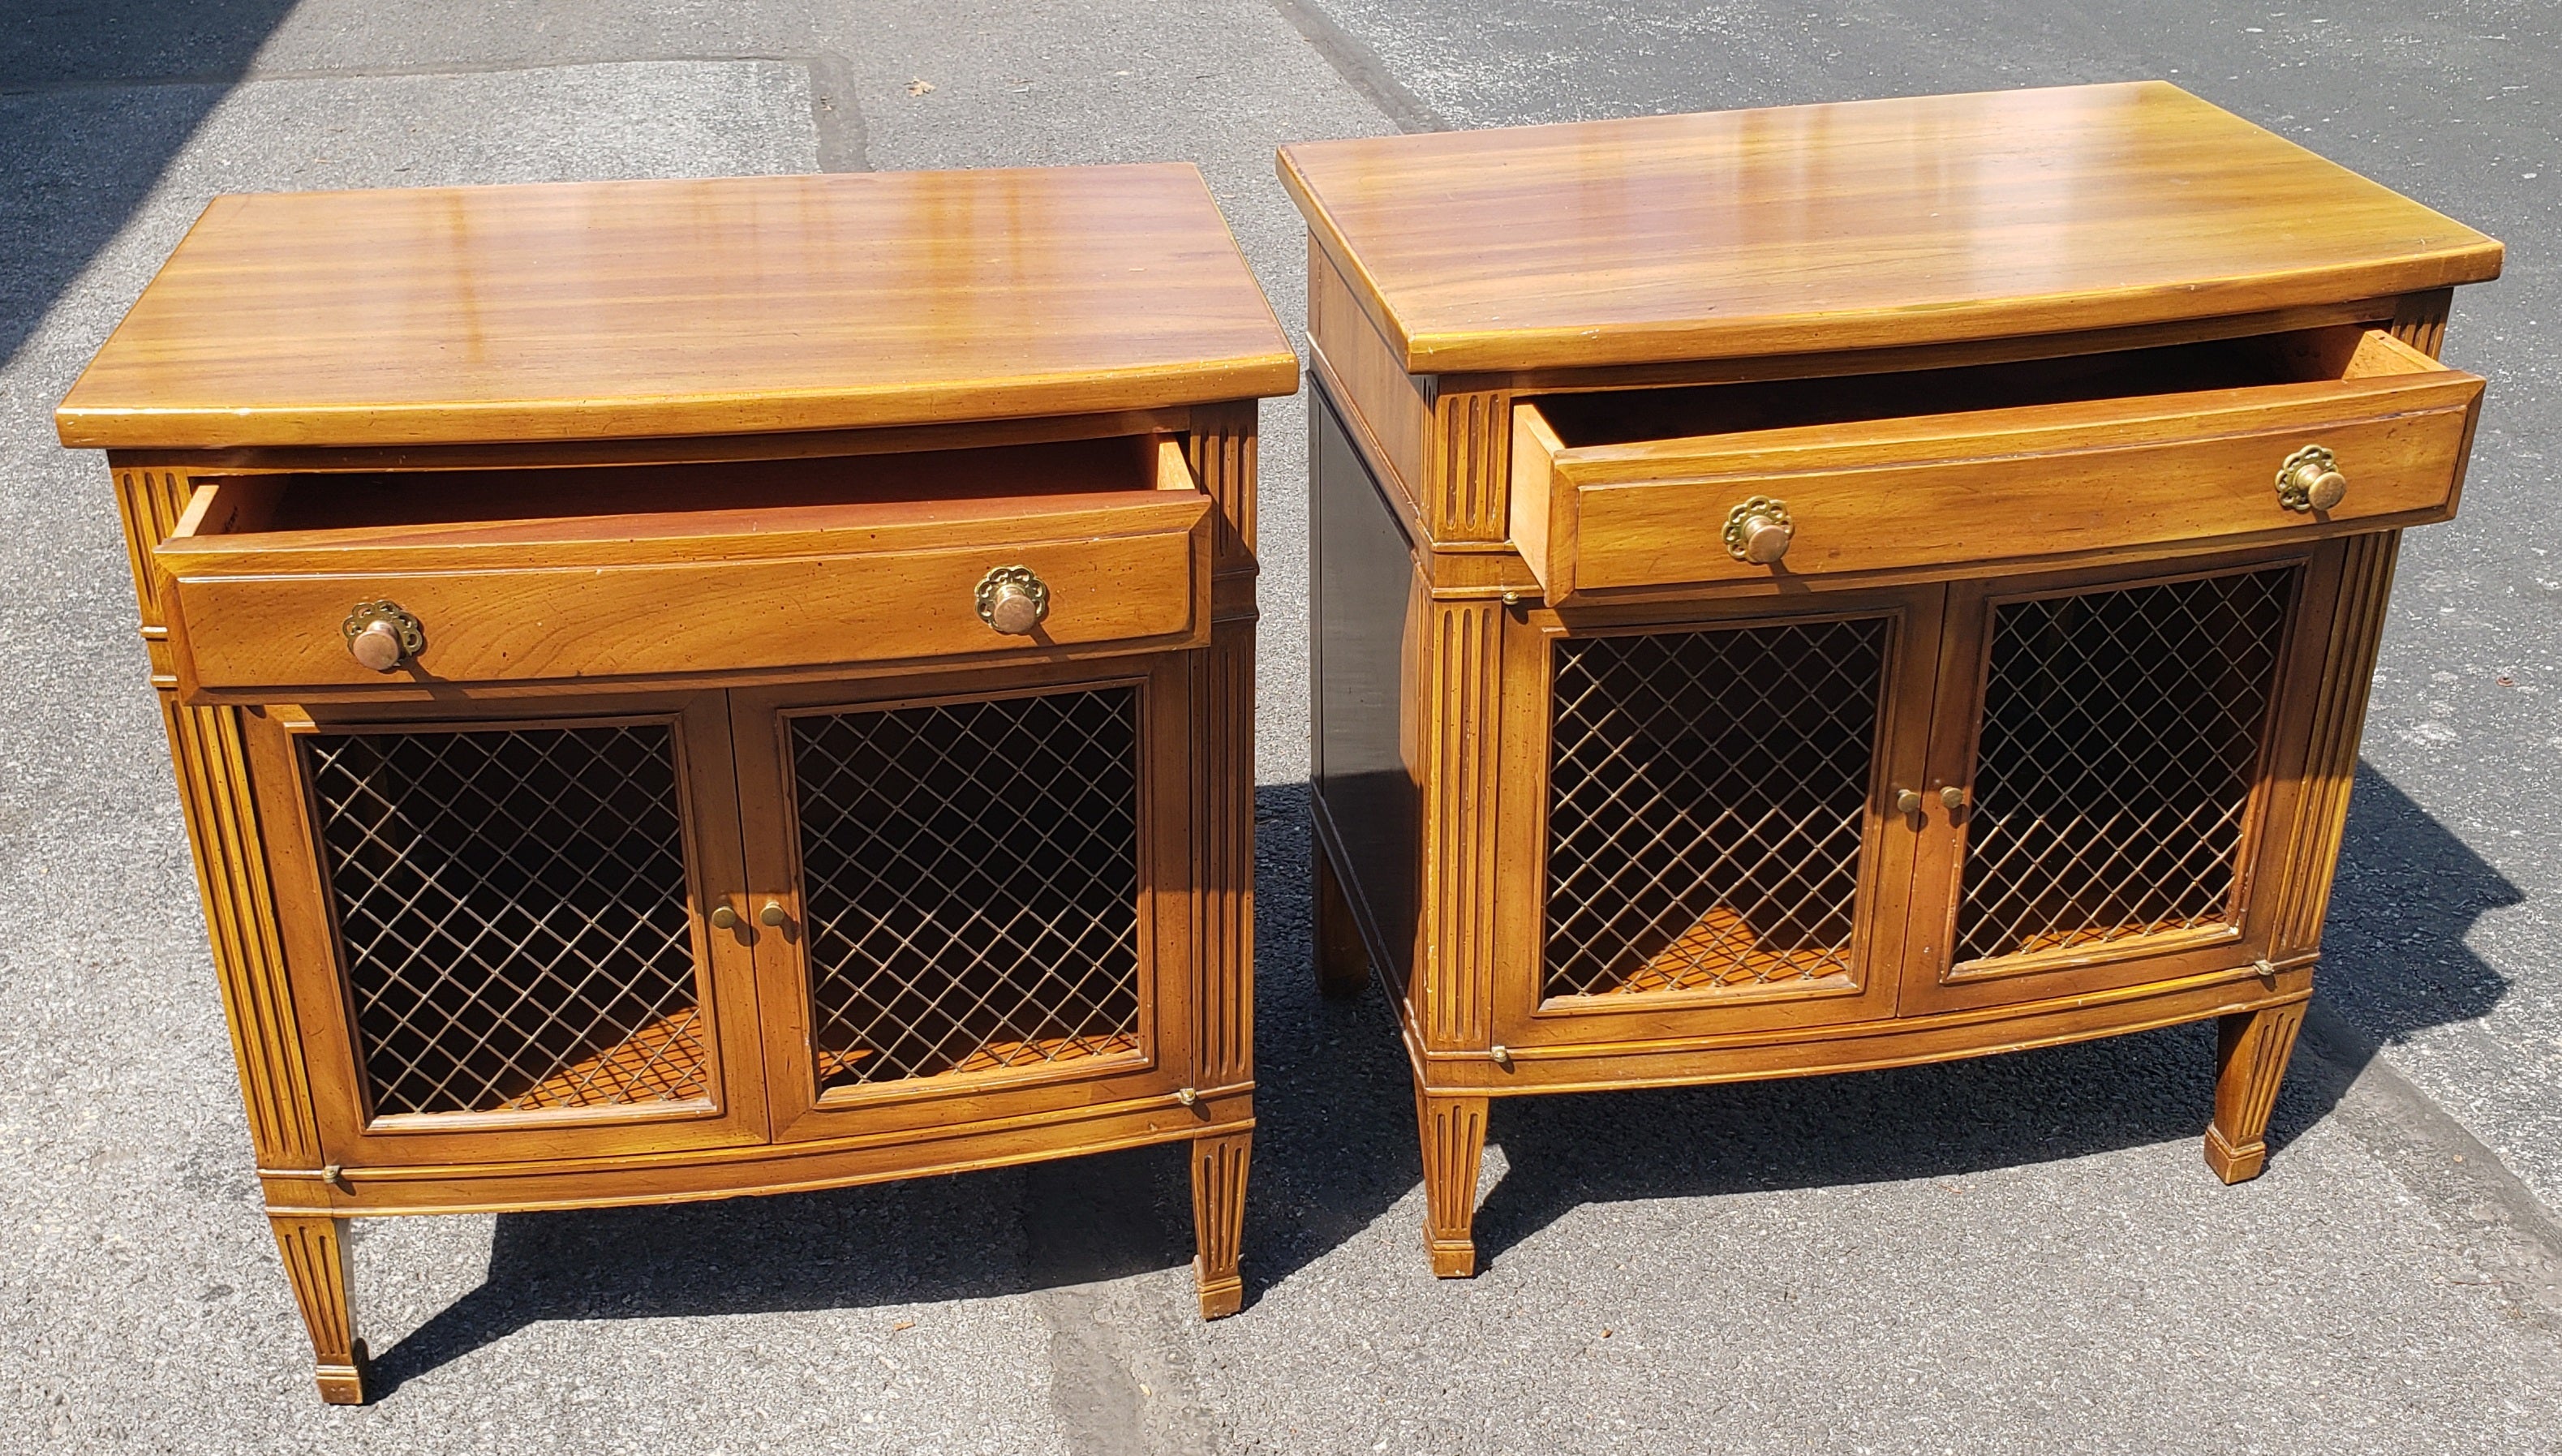 20th Century John Widdicomb French Country Side Tables Nightstands, Circa 1950s